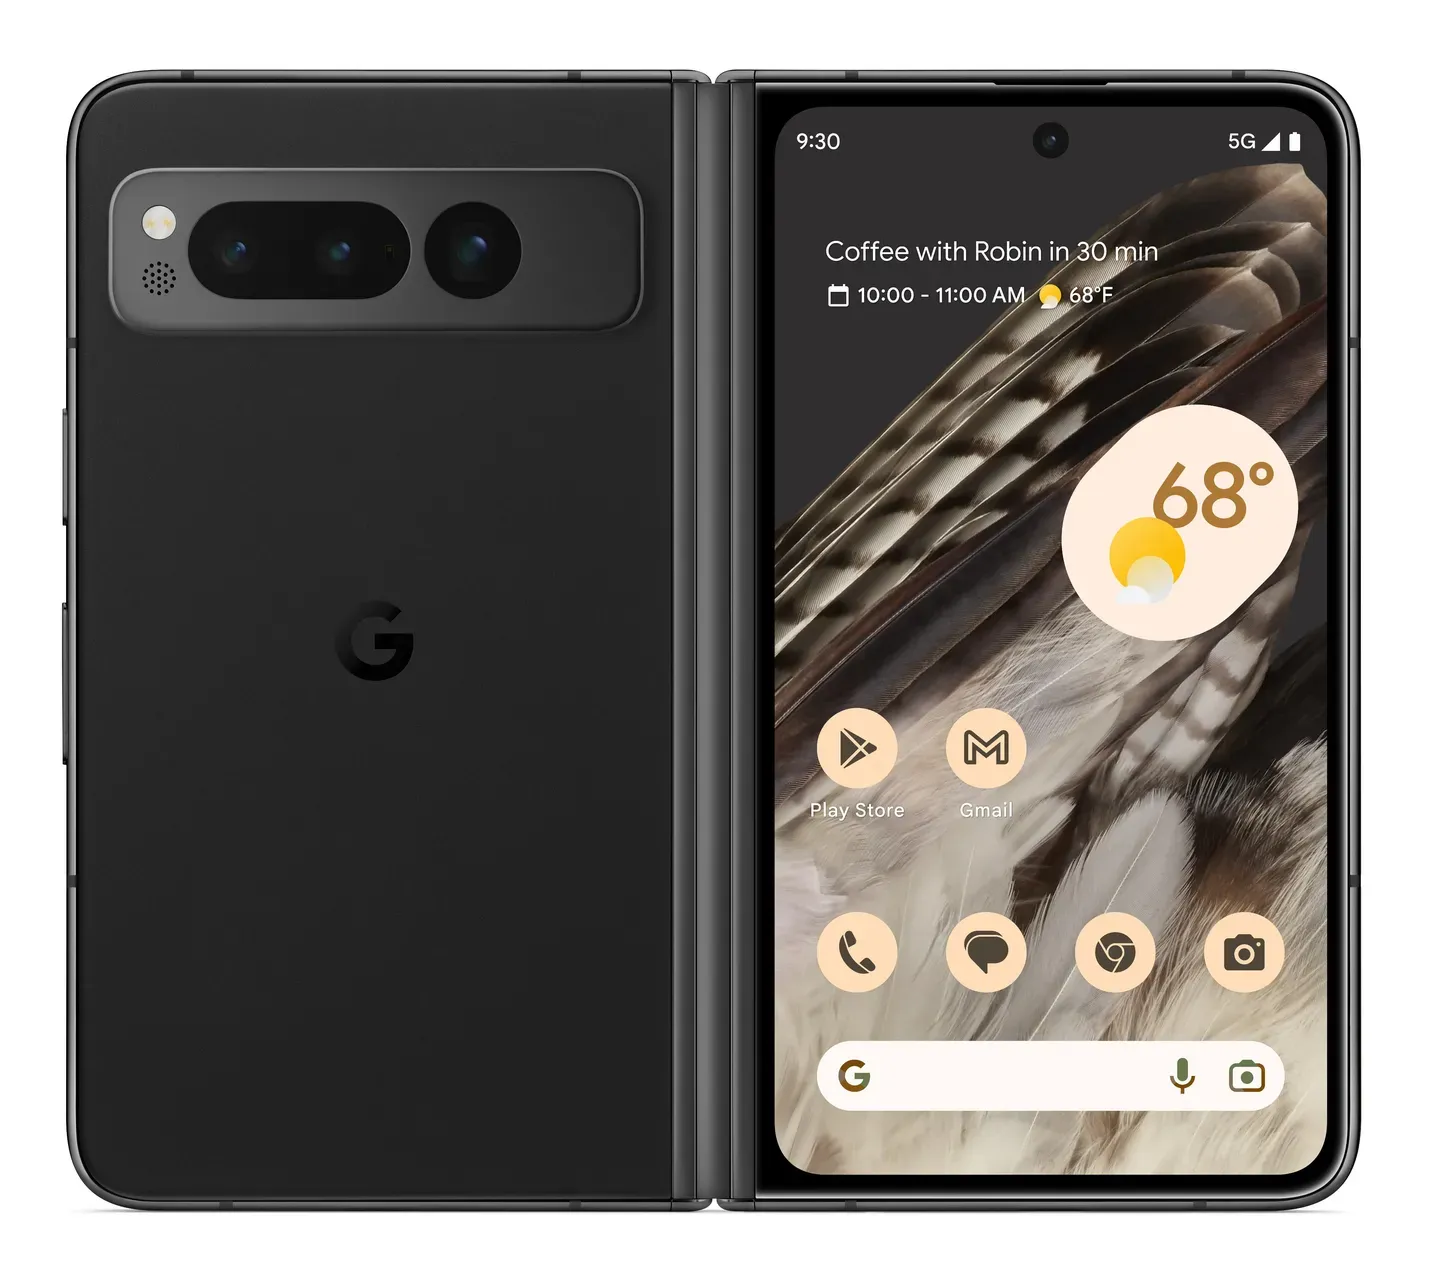 New images Pixel Fold seem official from Google